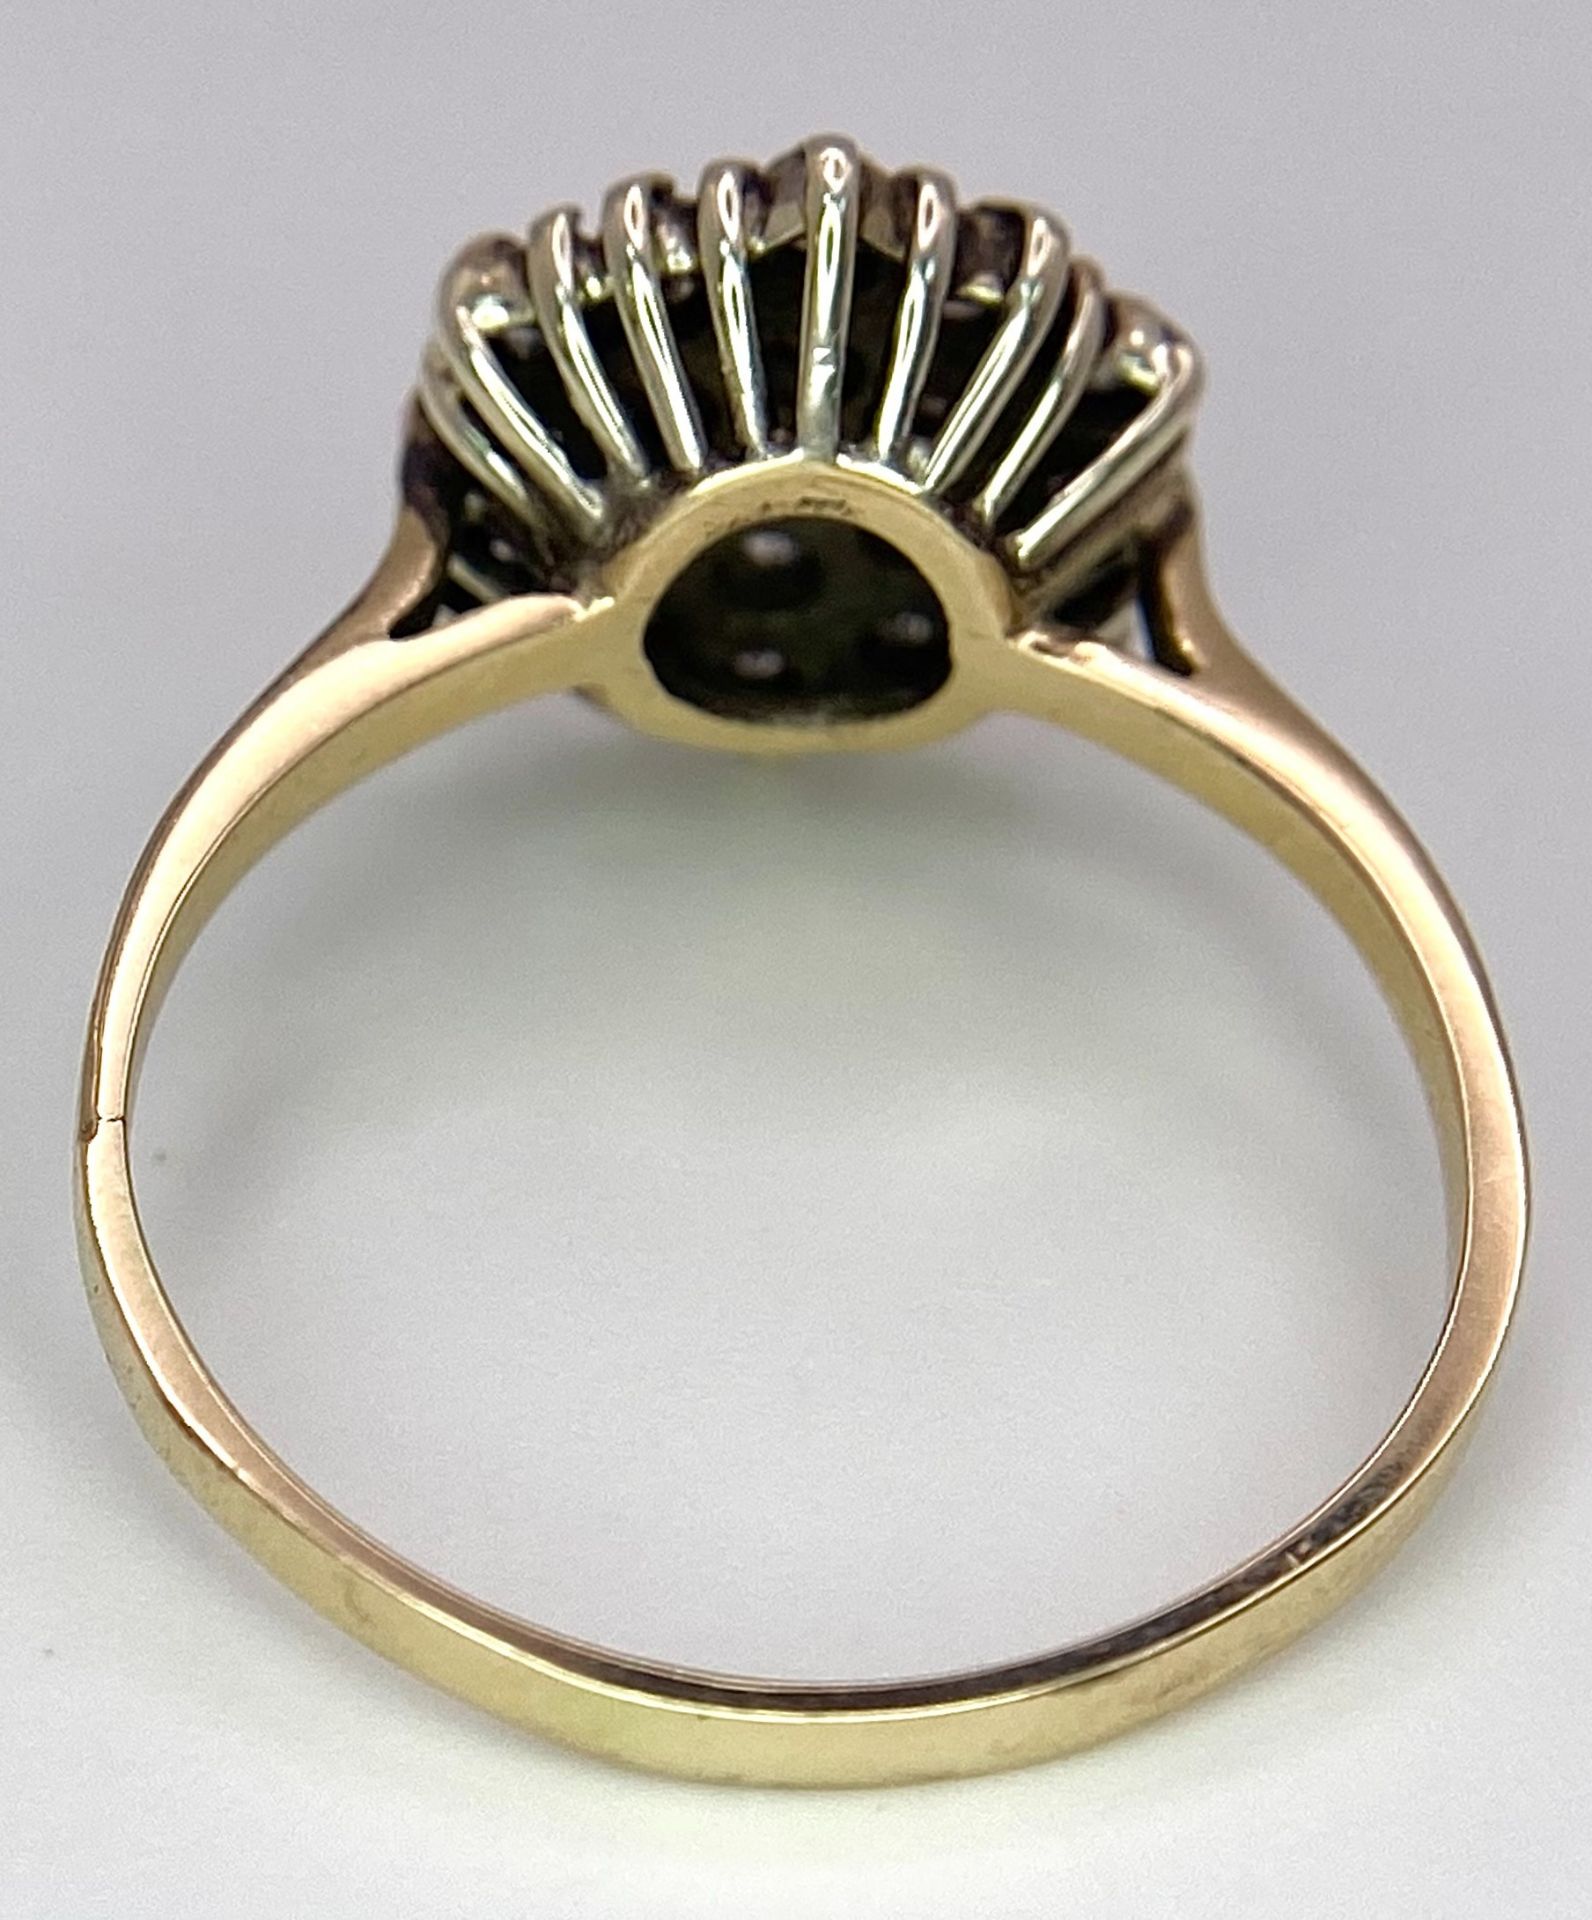 A 9K YELLOW GOLD DIAMOND CLUSTER RING. 0.50CT. 2.4G. SIZE M. - Image 5 of 5